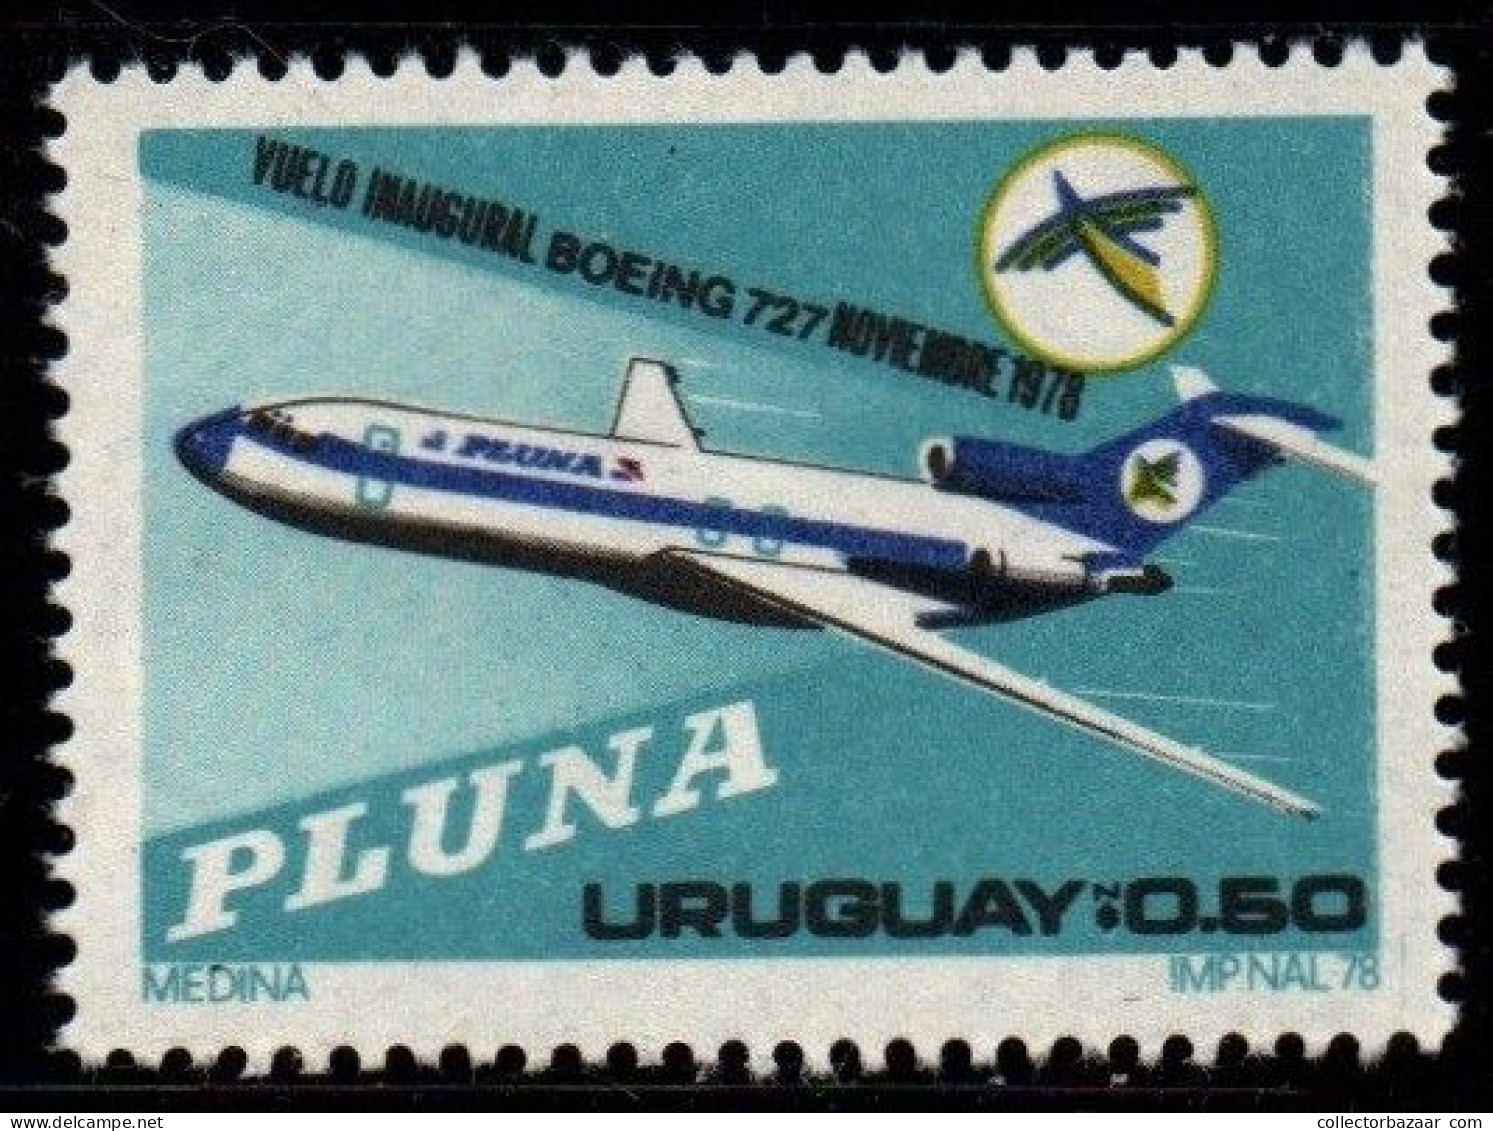 1978 Uruguay Boeing 727 Inauguration By PLUNA Airlines #1014 ** MNH - Uruguay